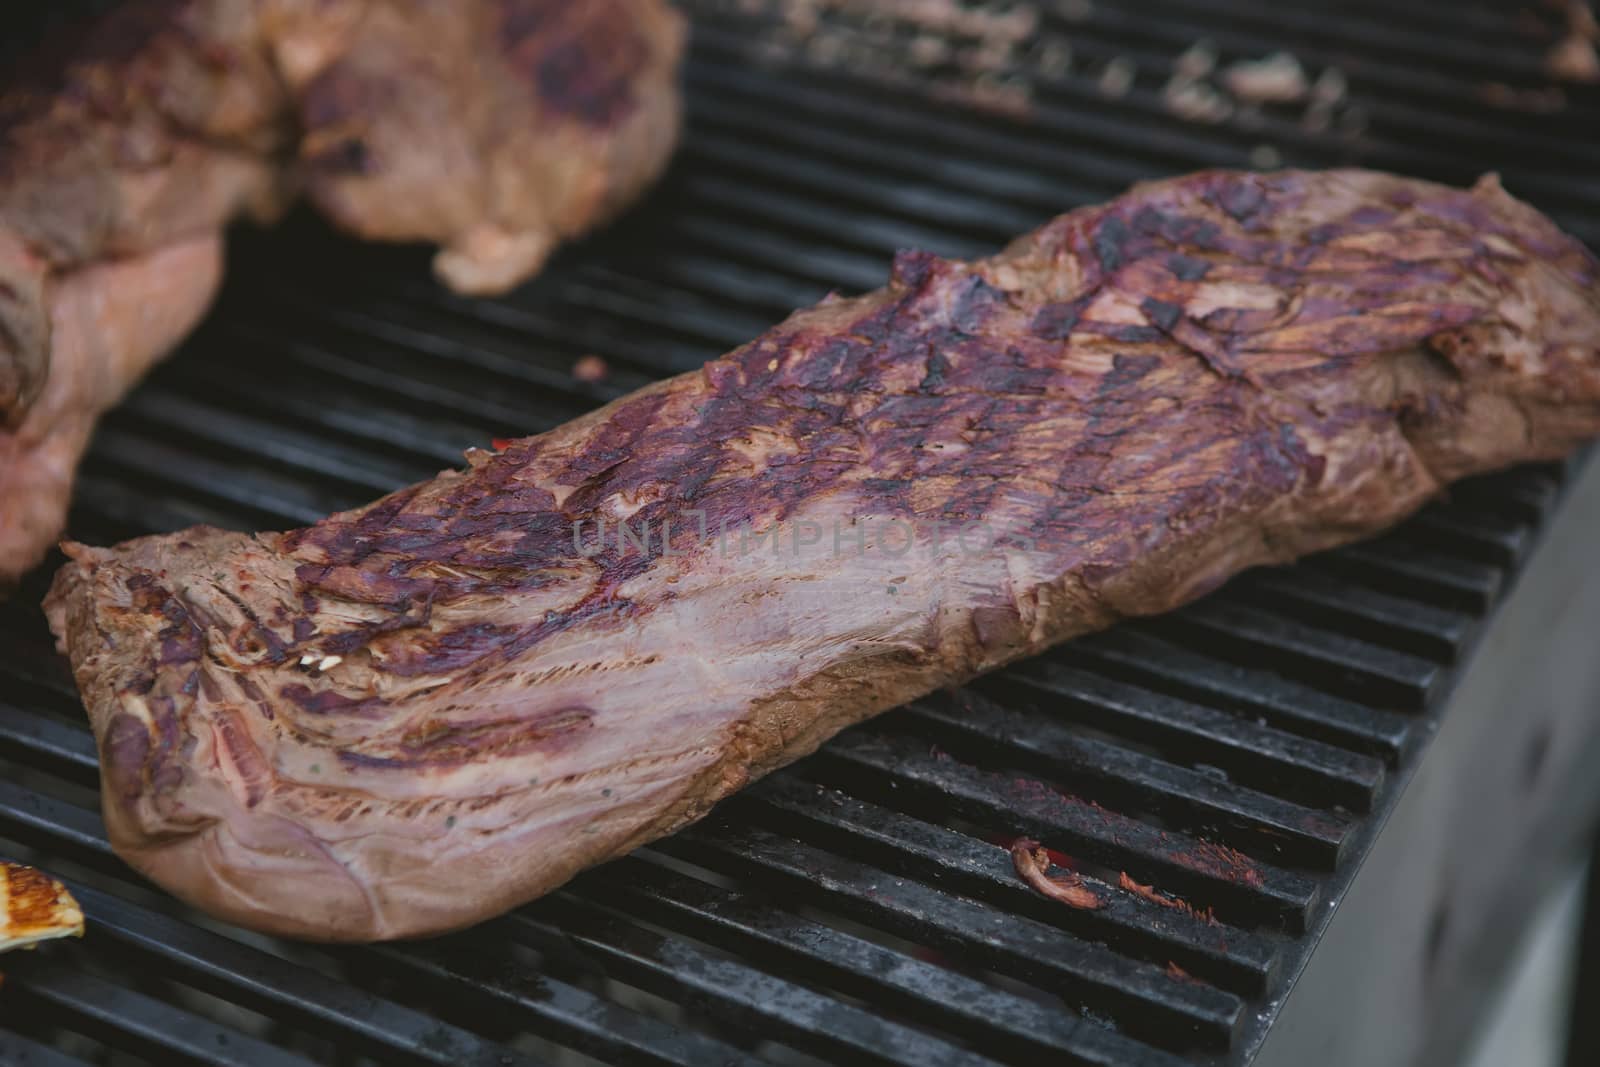 organic beef on the grill. close-up. Shallow DOF.